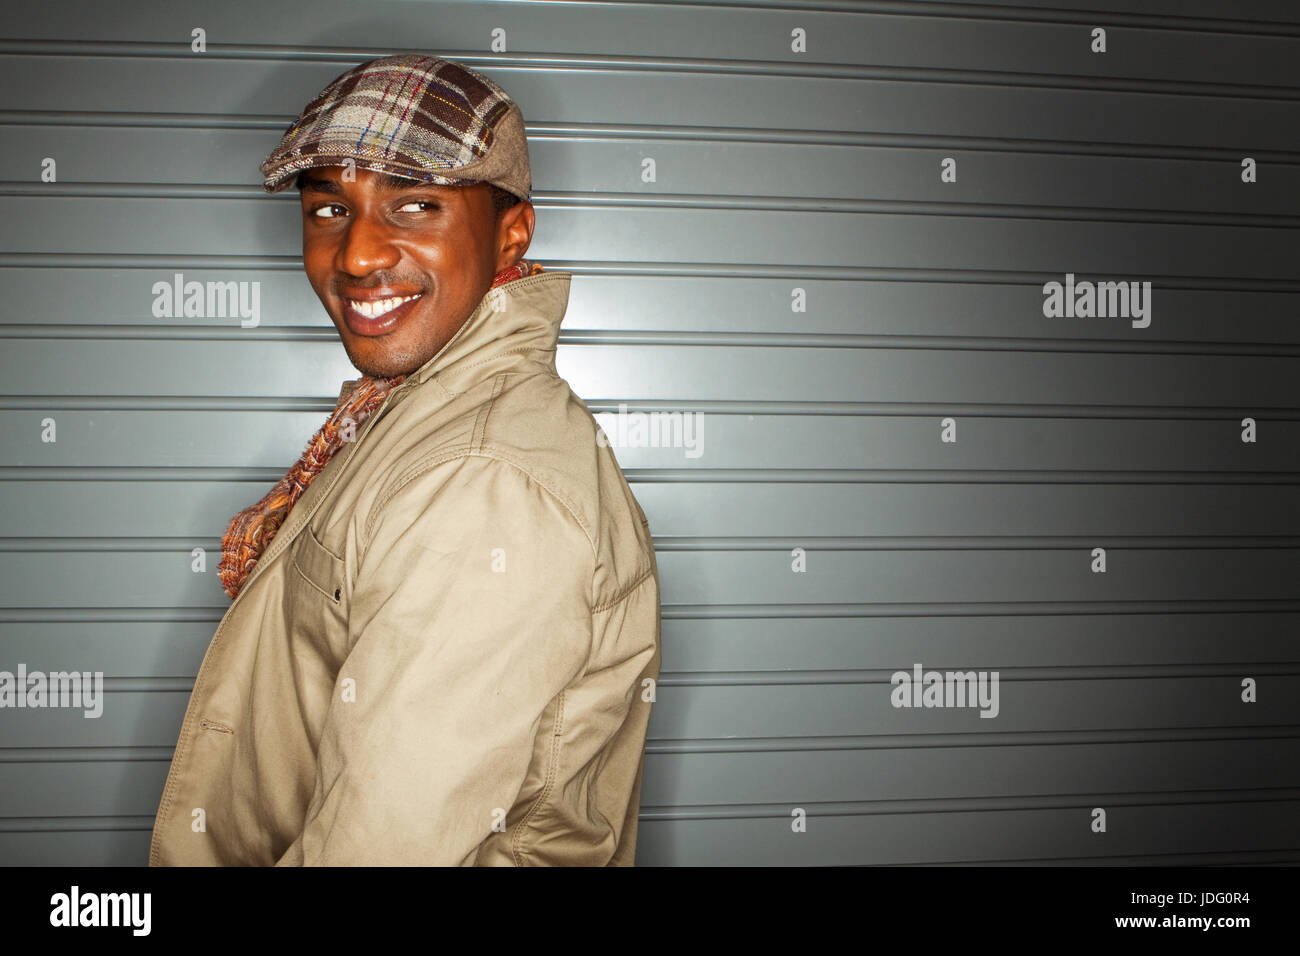 Happy fashionable young man laughing. Stock Photo